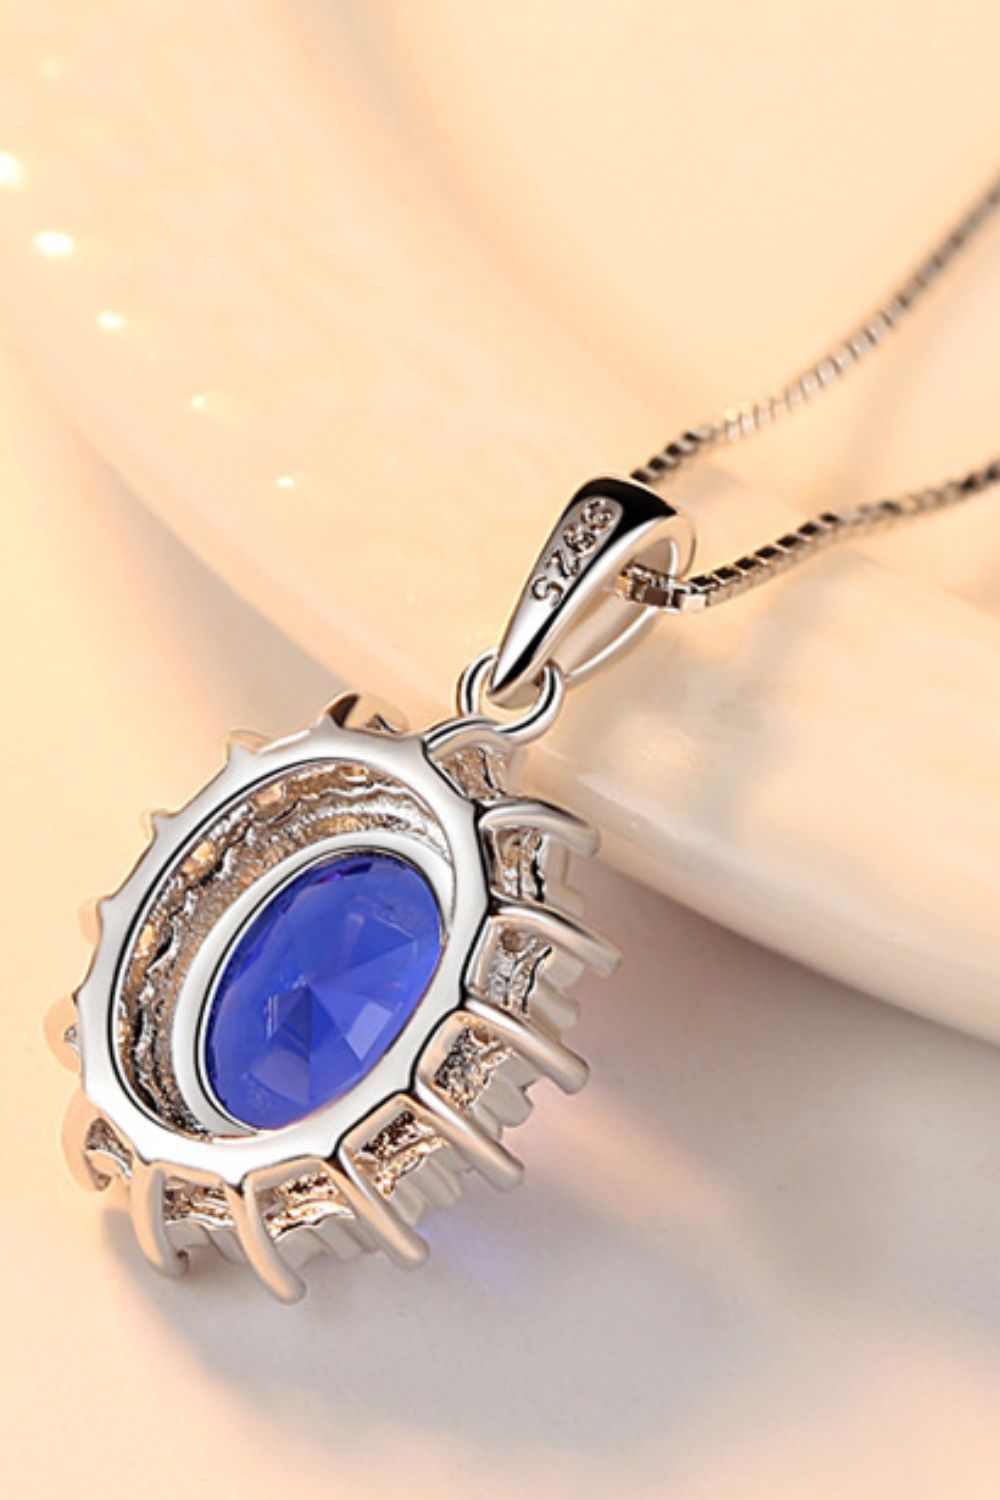 Sparkling Sapphire Pendant 925 Sterling Silver Necklace